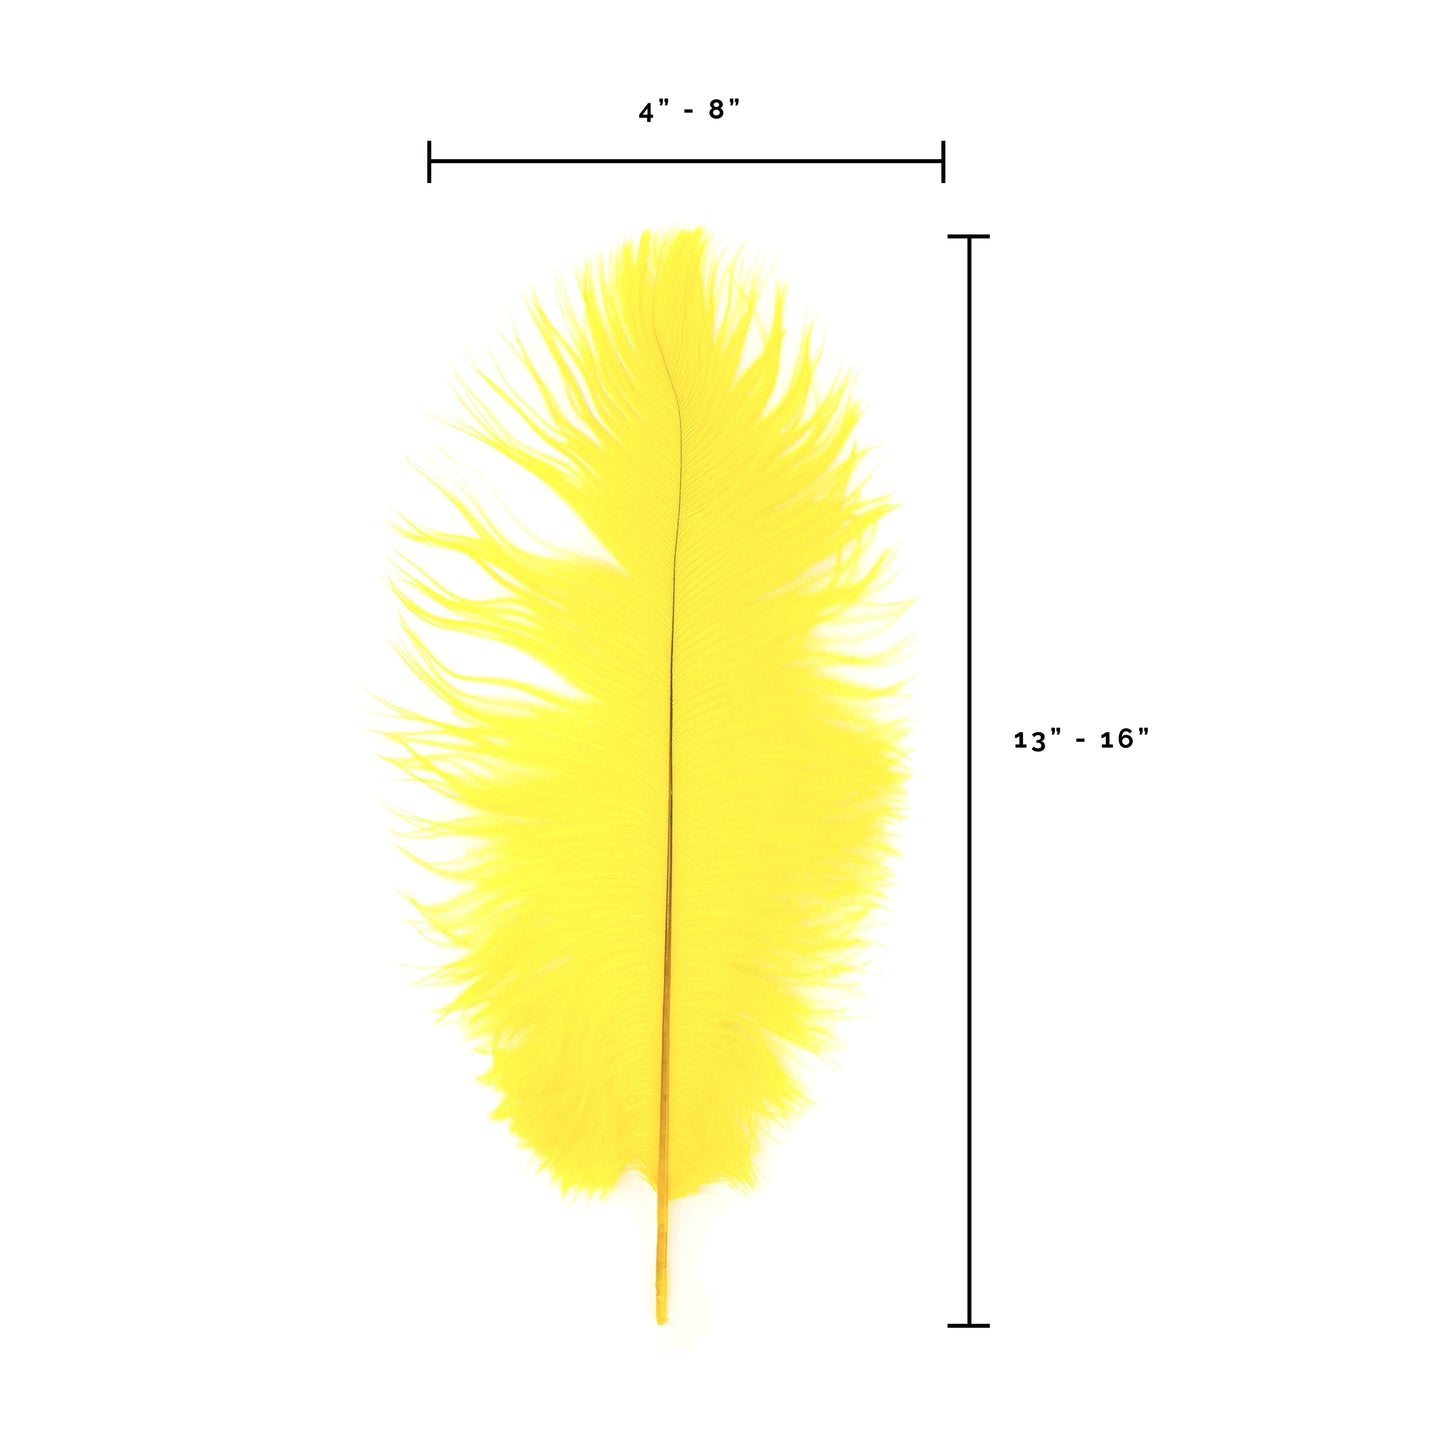 Ostrich Feathers 13-16" Drabs - Yellow